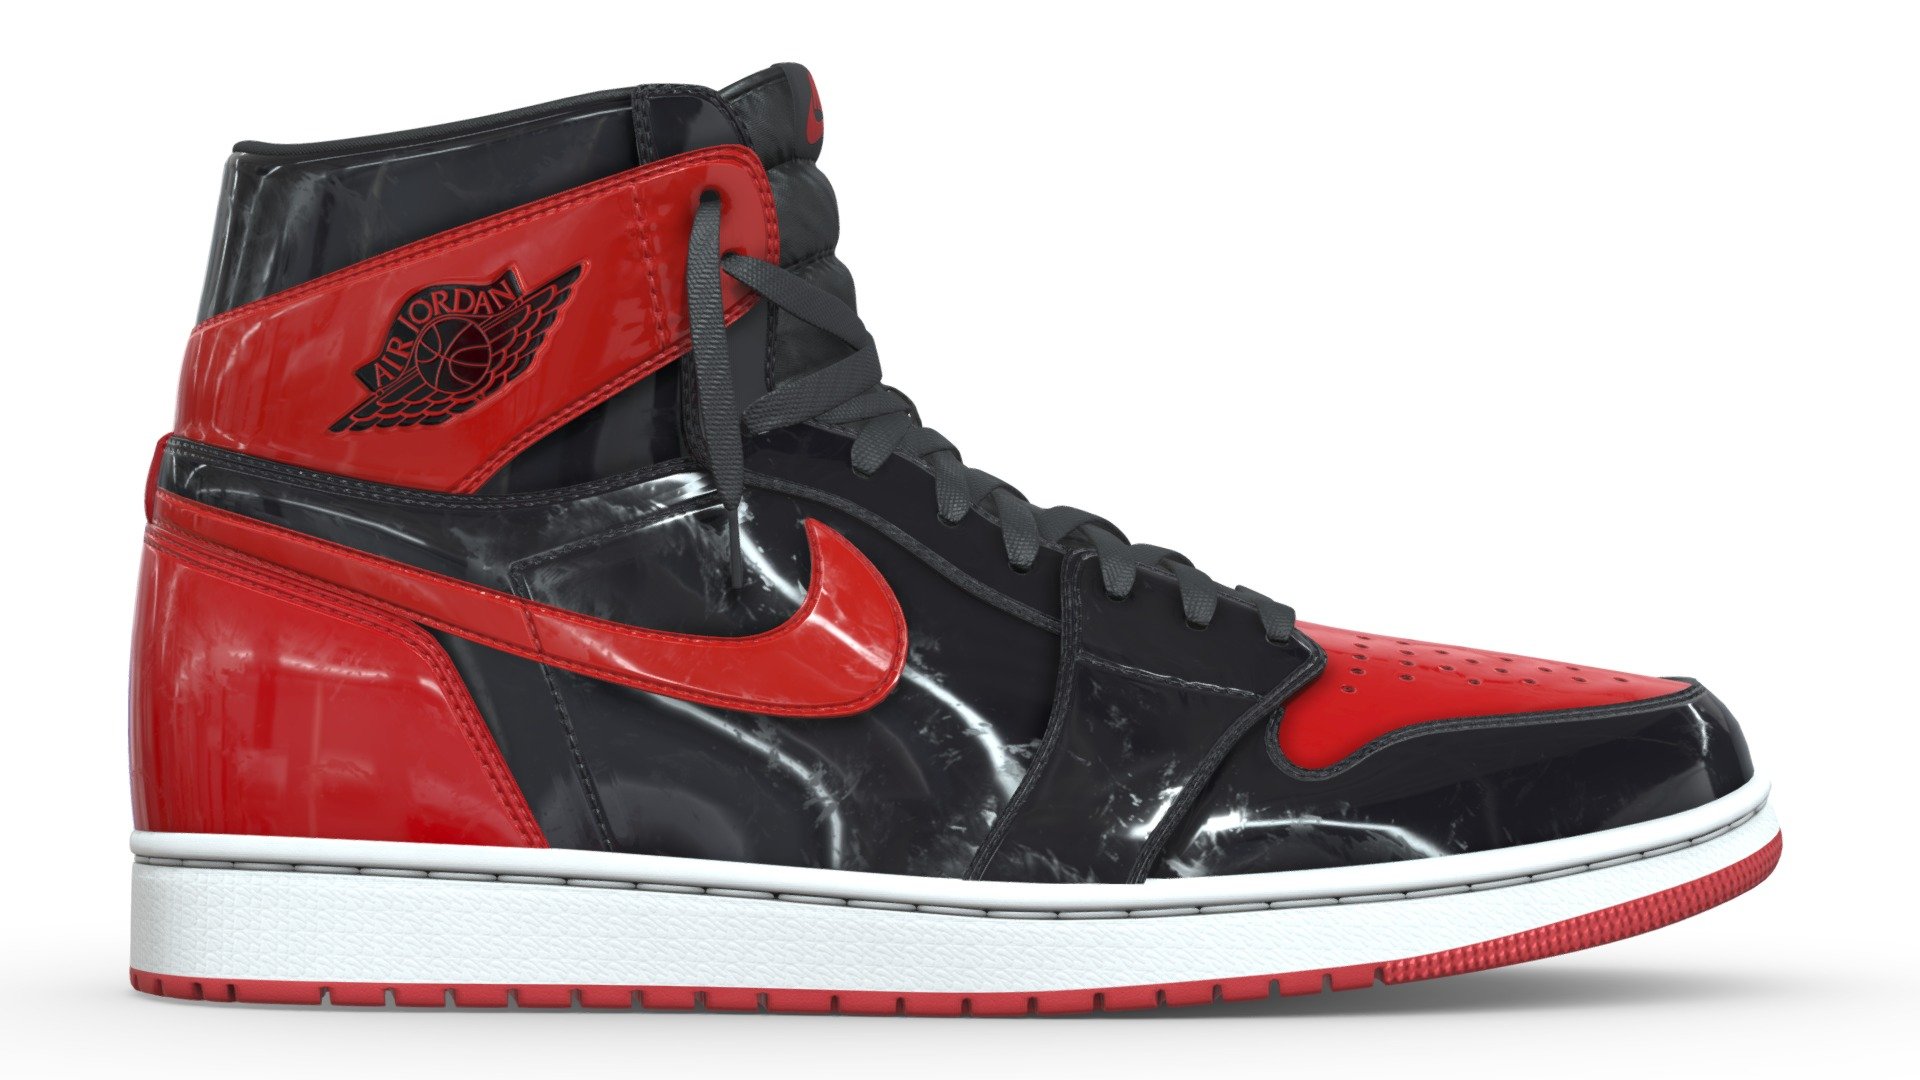 Jordan 1 silhouette in the Patent Bred Colourway. A glossy take on the Jordan 1, the Patent Bred colourway swaps smooth leather for shiny, patent leather. Utilizing the classic Bred colour blocking, the shoe matches a timeless look with a flashy, modern take. The white midsole, red sole, black tongue and sock liner are the only panels not to use patent leather. 

Modelled in Blender and textured in Substance, no detail went overlooked in the creation of this shoe. As a result it is subdivision ready. Unwrapped with efficiency in mind both left and right shoes are mostly identical, save for logos and text that cannot be mirrored. This was done to save on having 8 texture sets instead of 4, most of the unwrapped mesh of one shoe overlaps with the other.

An alternate version of the shoe, which combines those 4 texture sets into just 1 isa available, along with lace colour variations 3d model